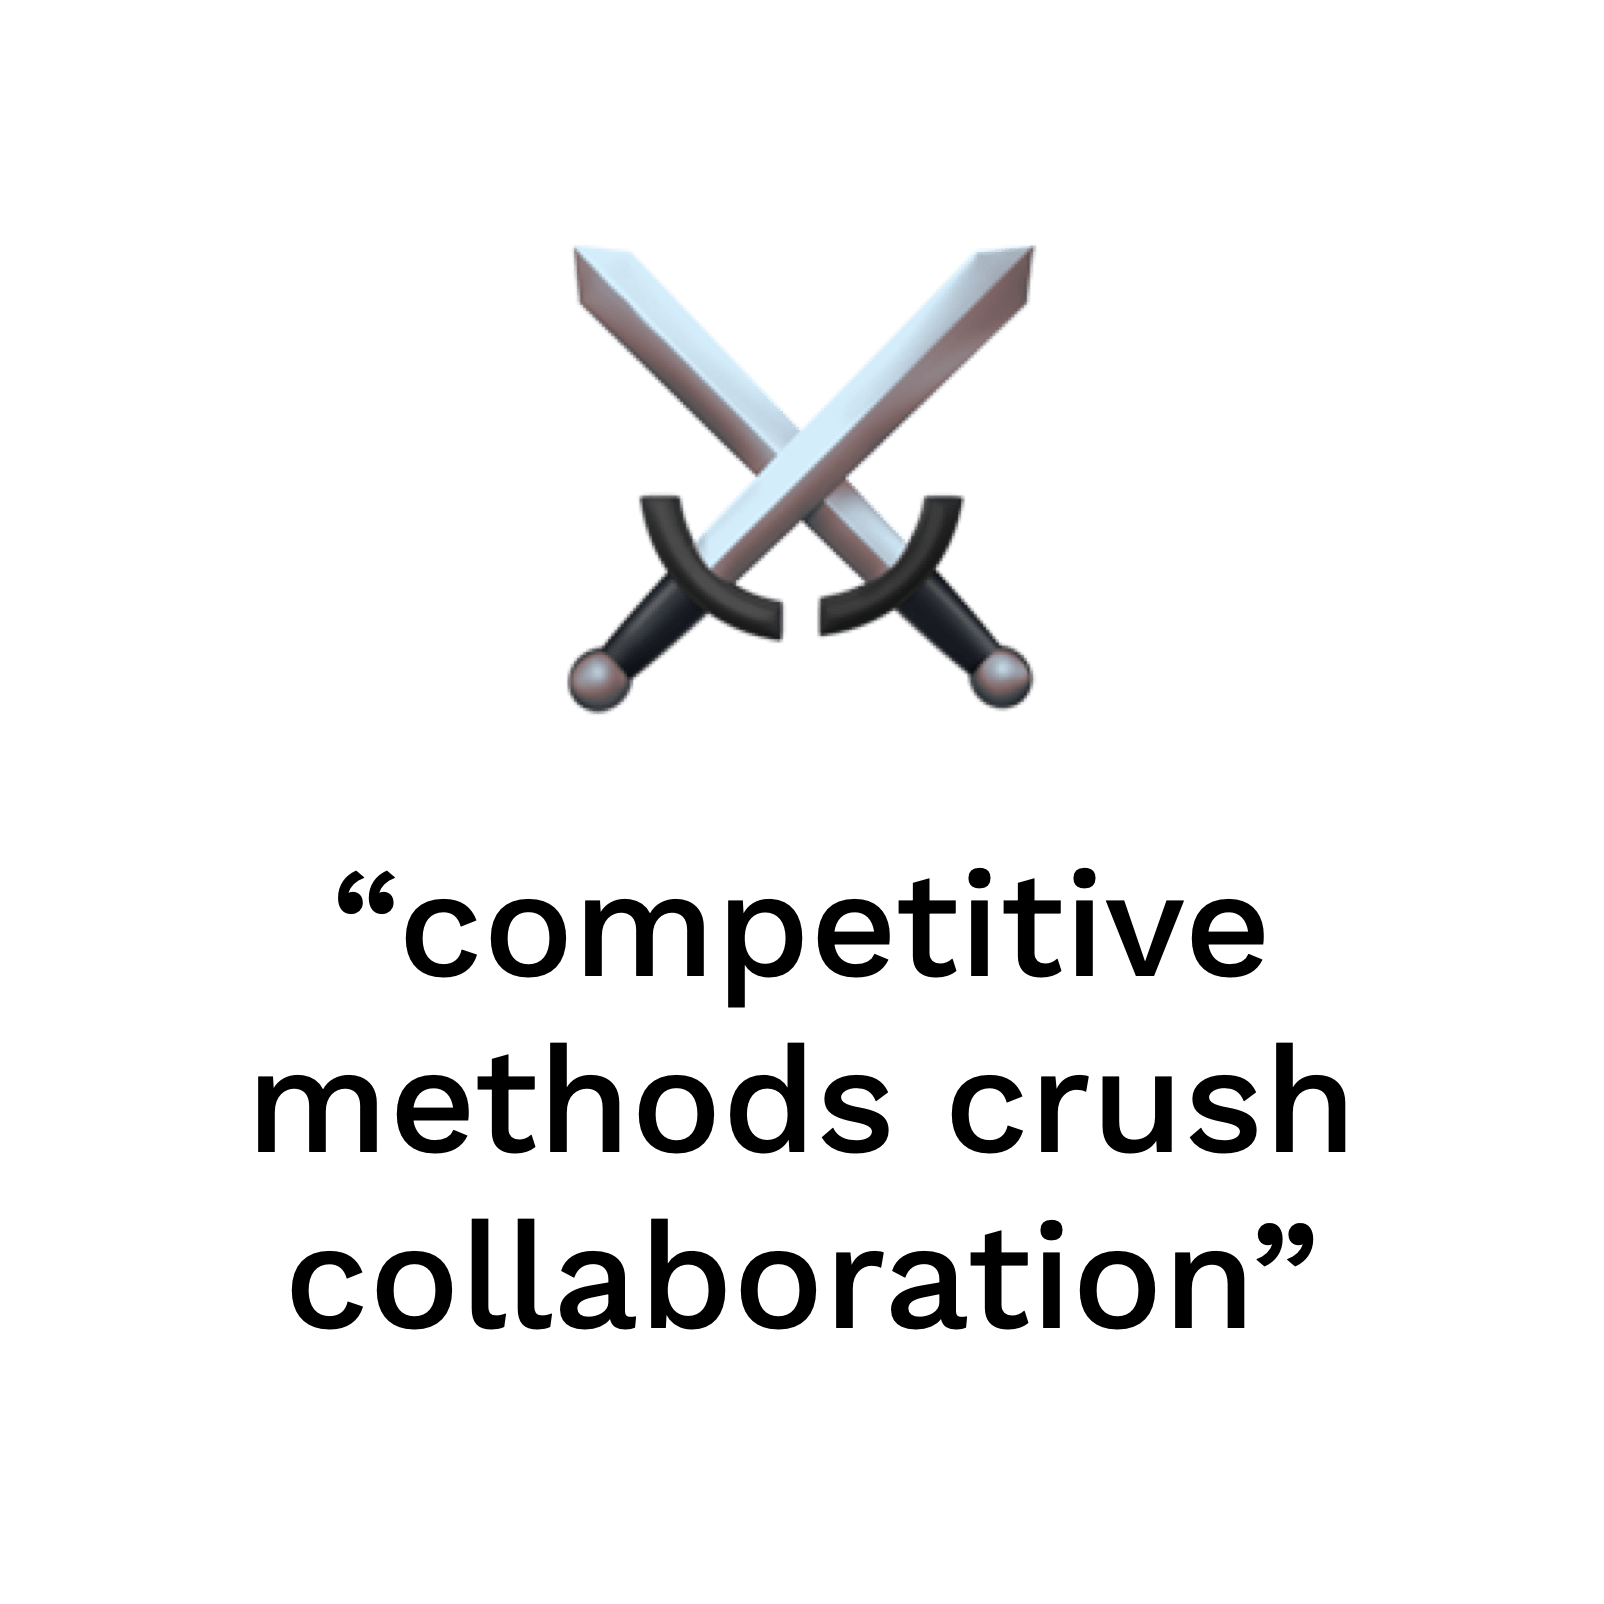 "competitive methods crush collaboration"